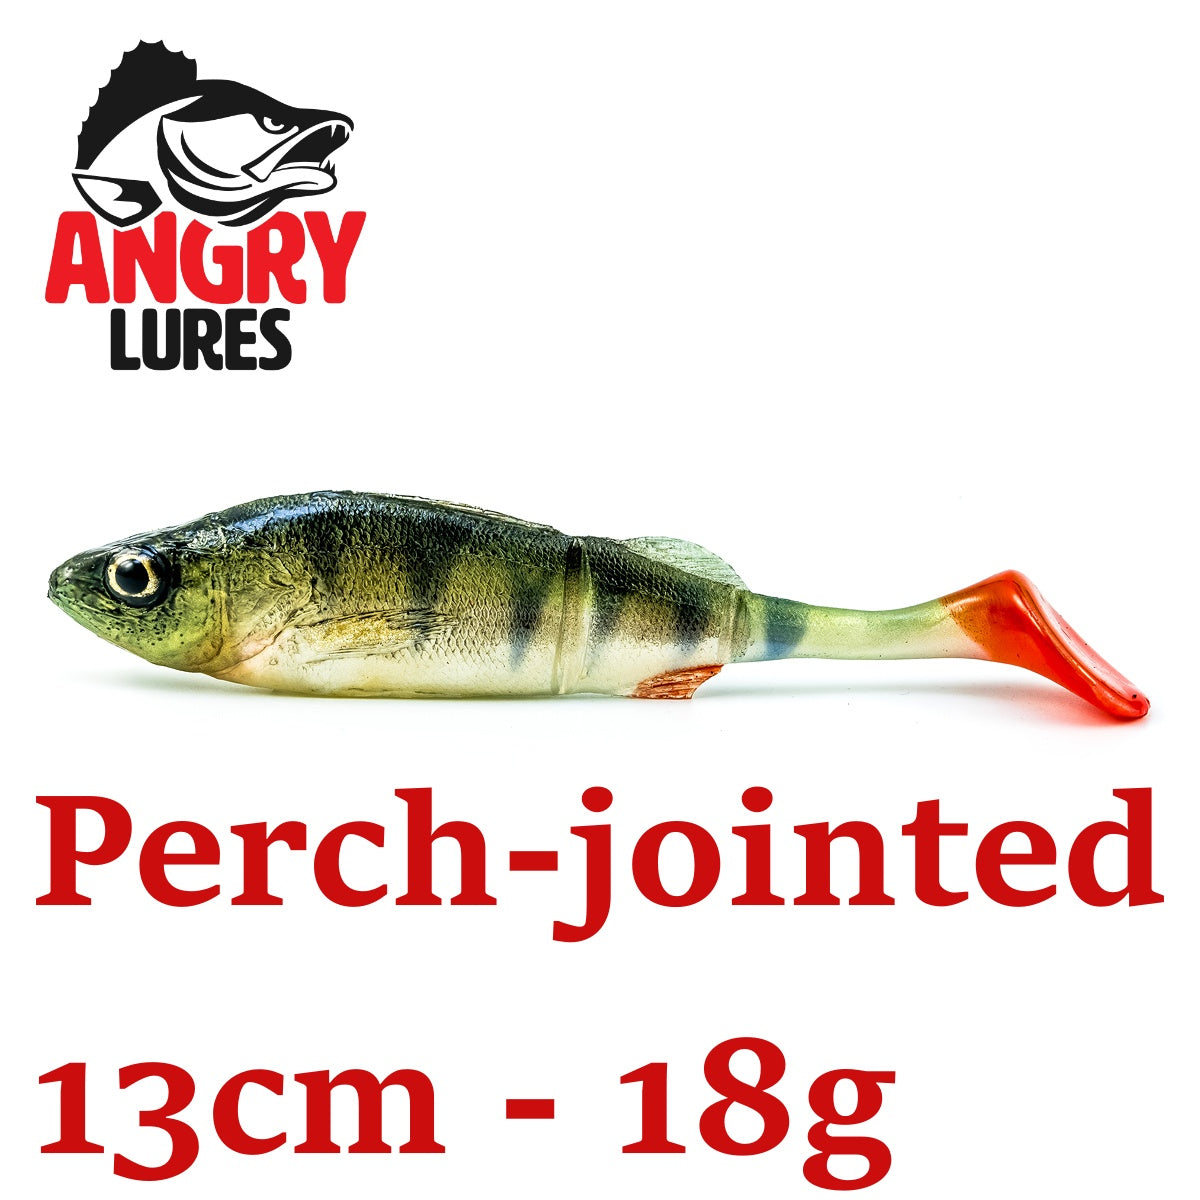 Angry lures. Perch-Jointed 13cm - 18g . Hand made – Predator maniac